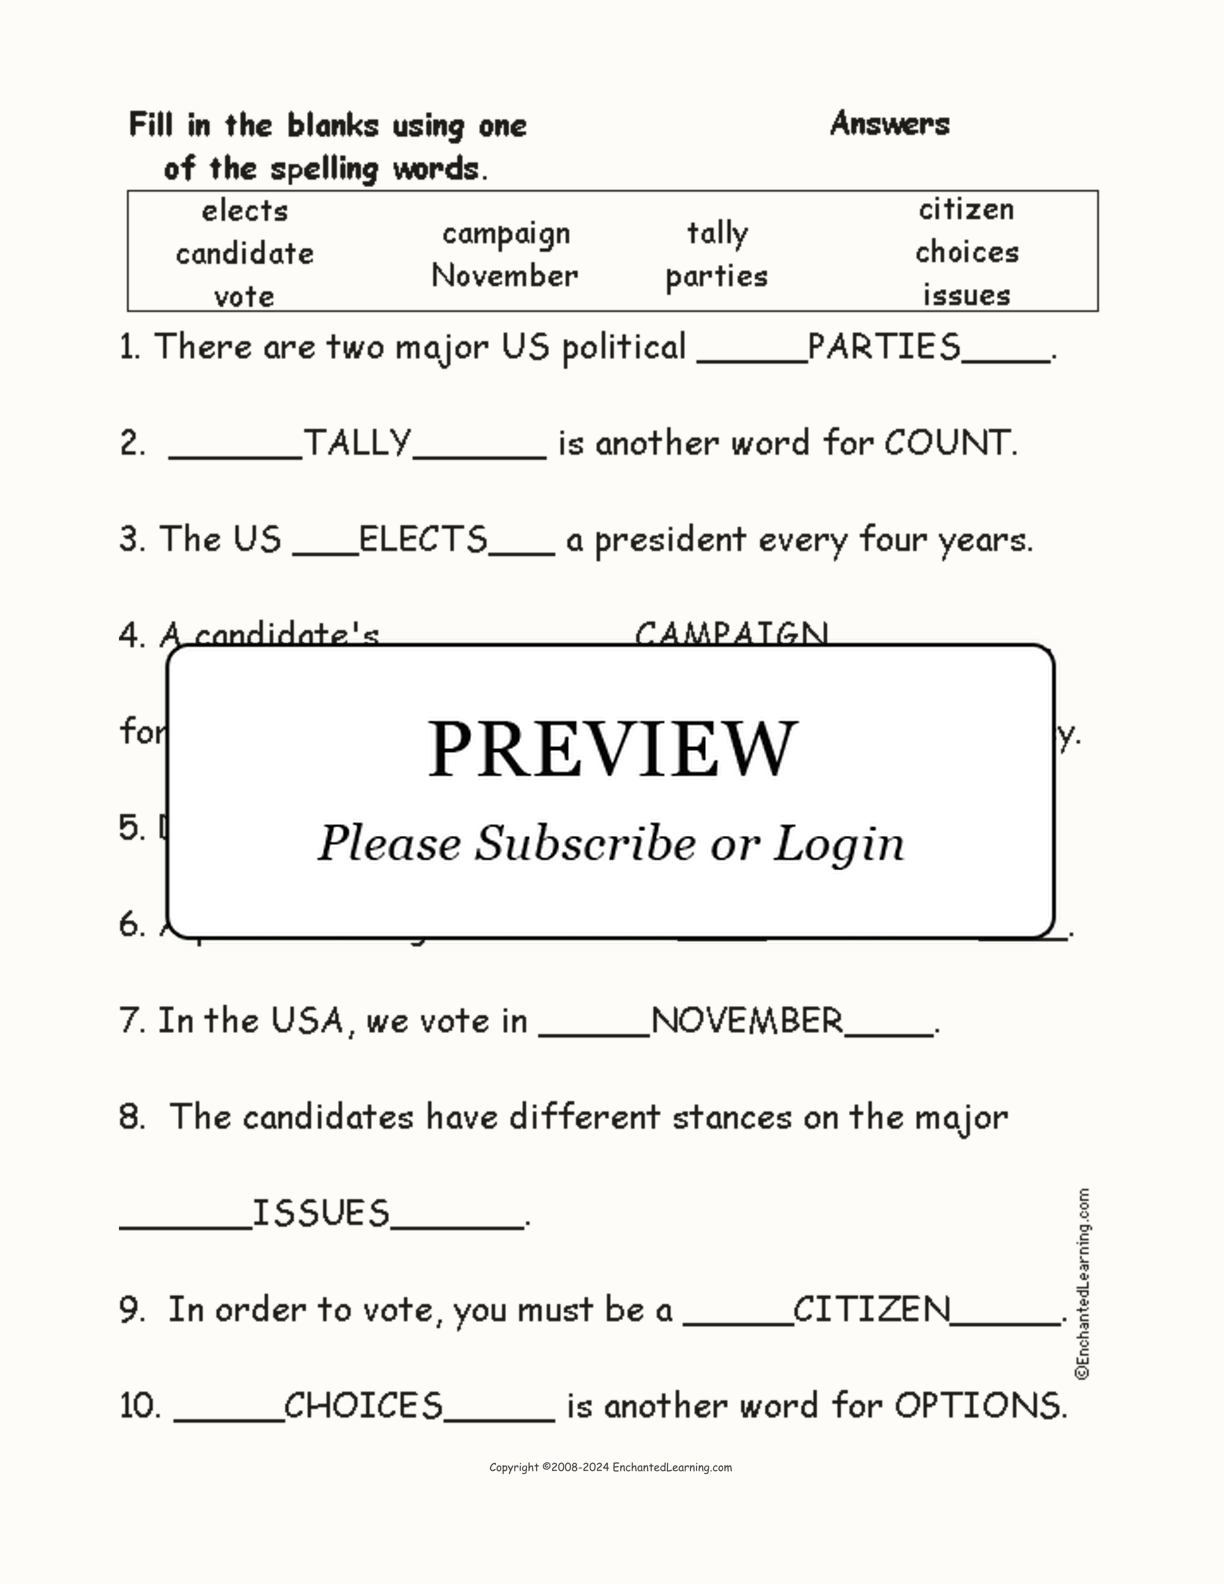 Election Spelling Word Questions interactive worksheet page 2